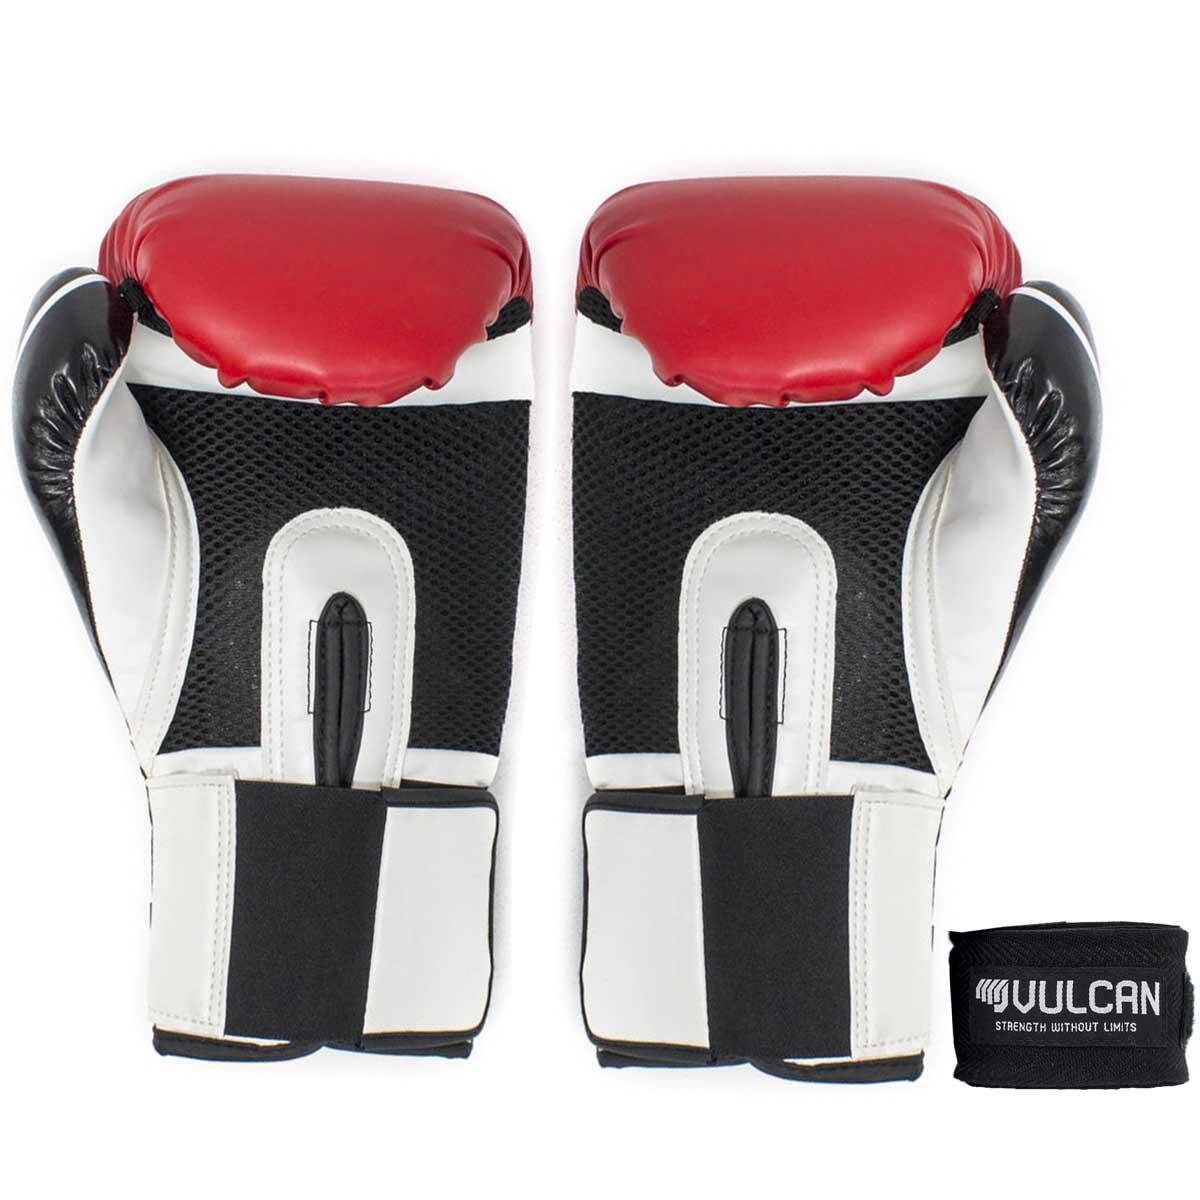 VULCAN BOXING GLOVES 12oz RED/BLACK WITH HANDWRAPS 5/7